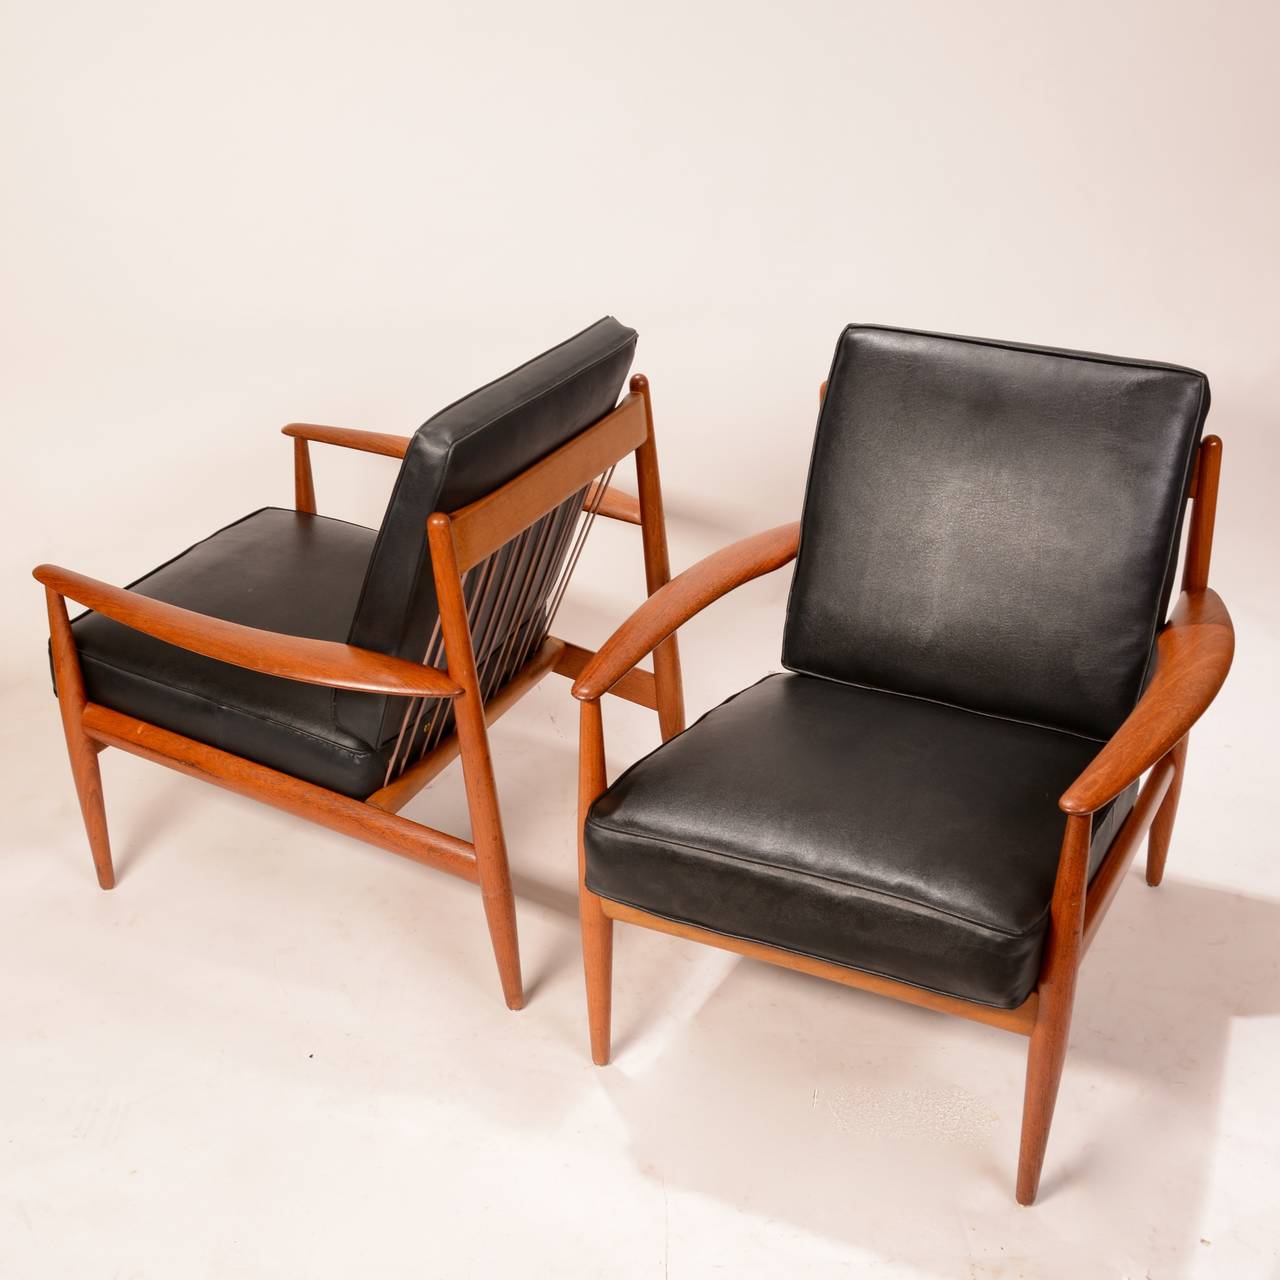 These are early and rare lounge chairs designed by Grete Jalk.  The set includes original black spring cushions.  